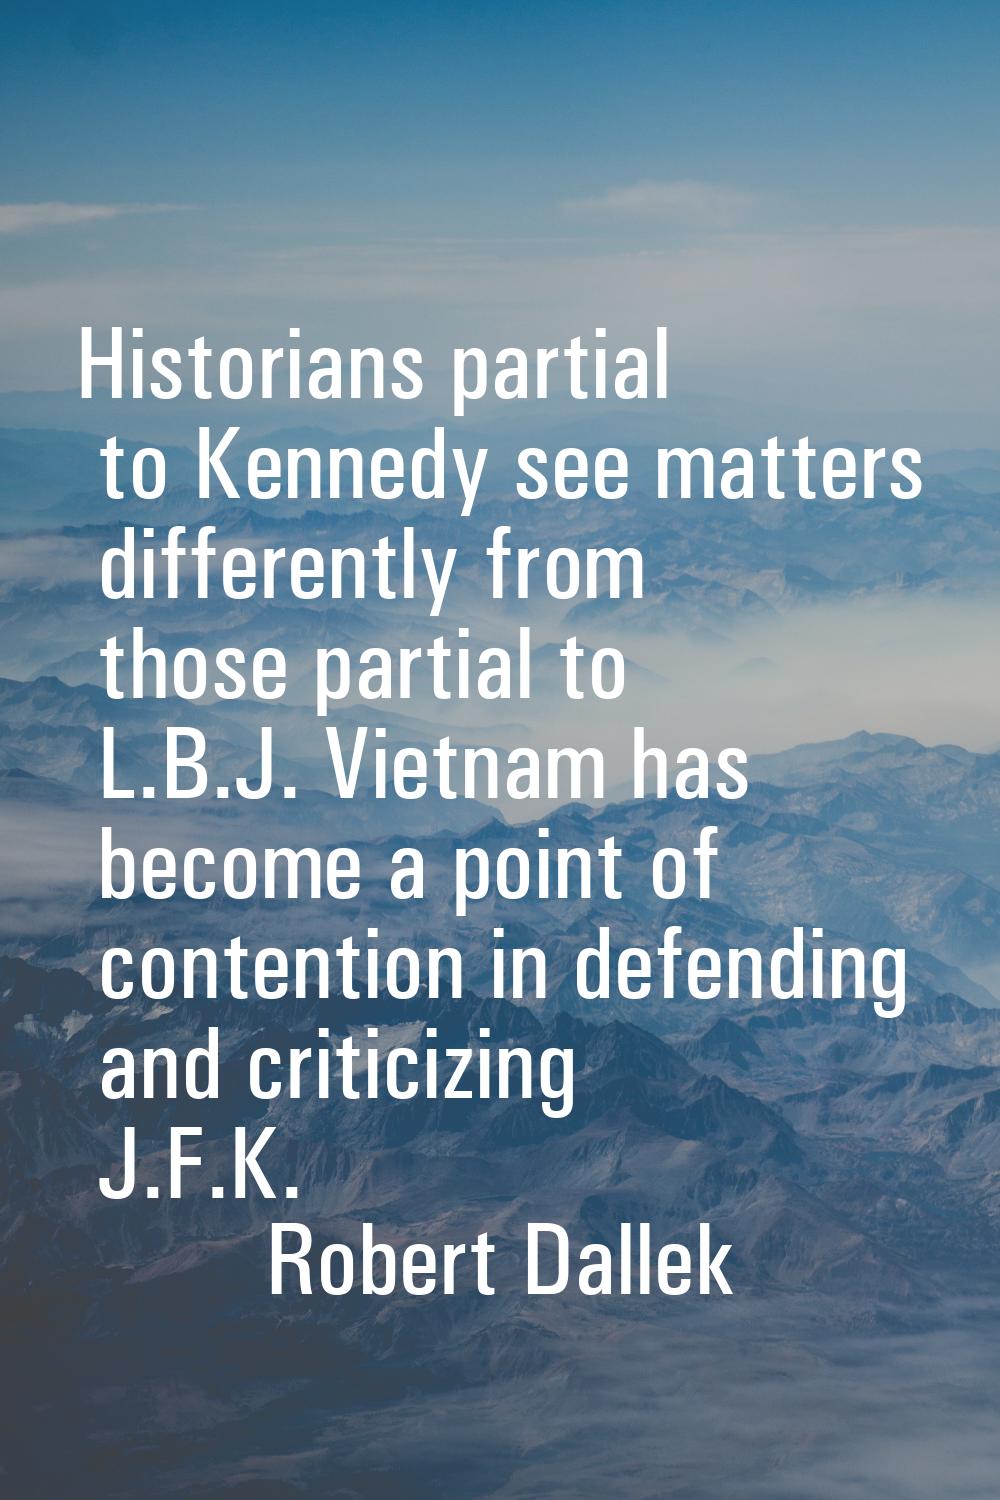 Historians partial to Kennedy see matters differently from those partial to L.B.J. Vietnam has beco